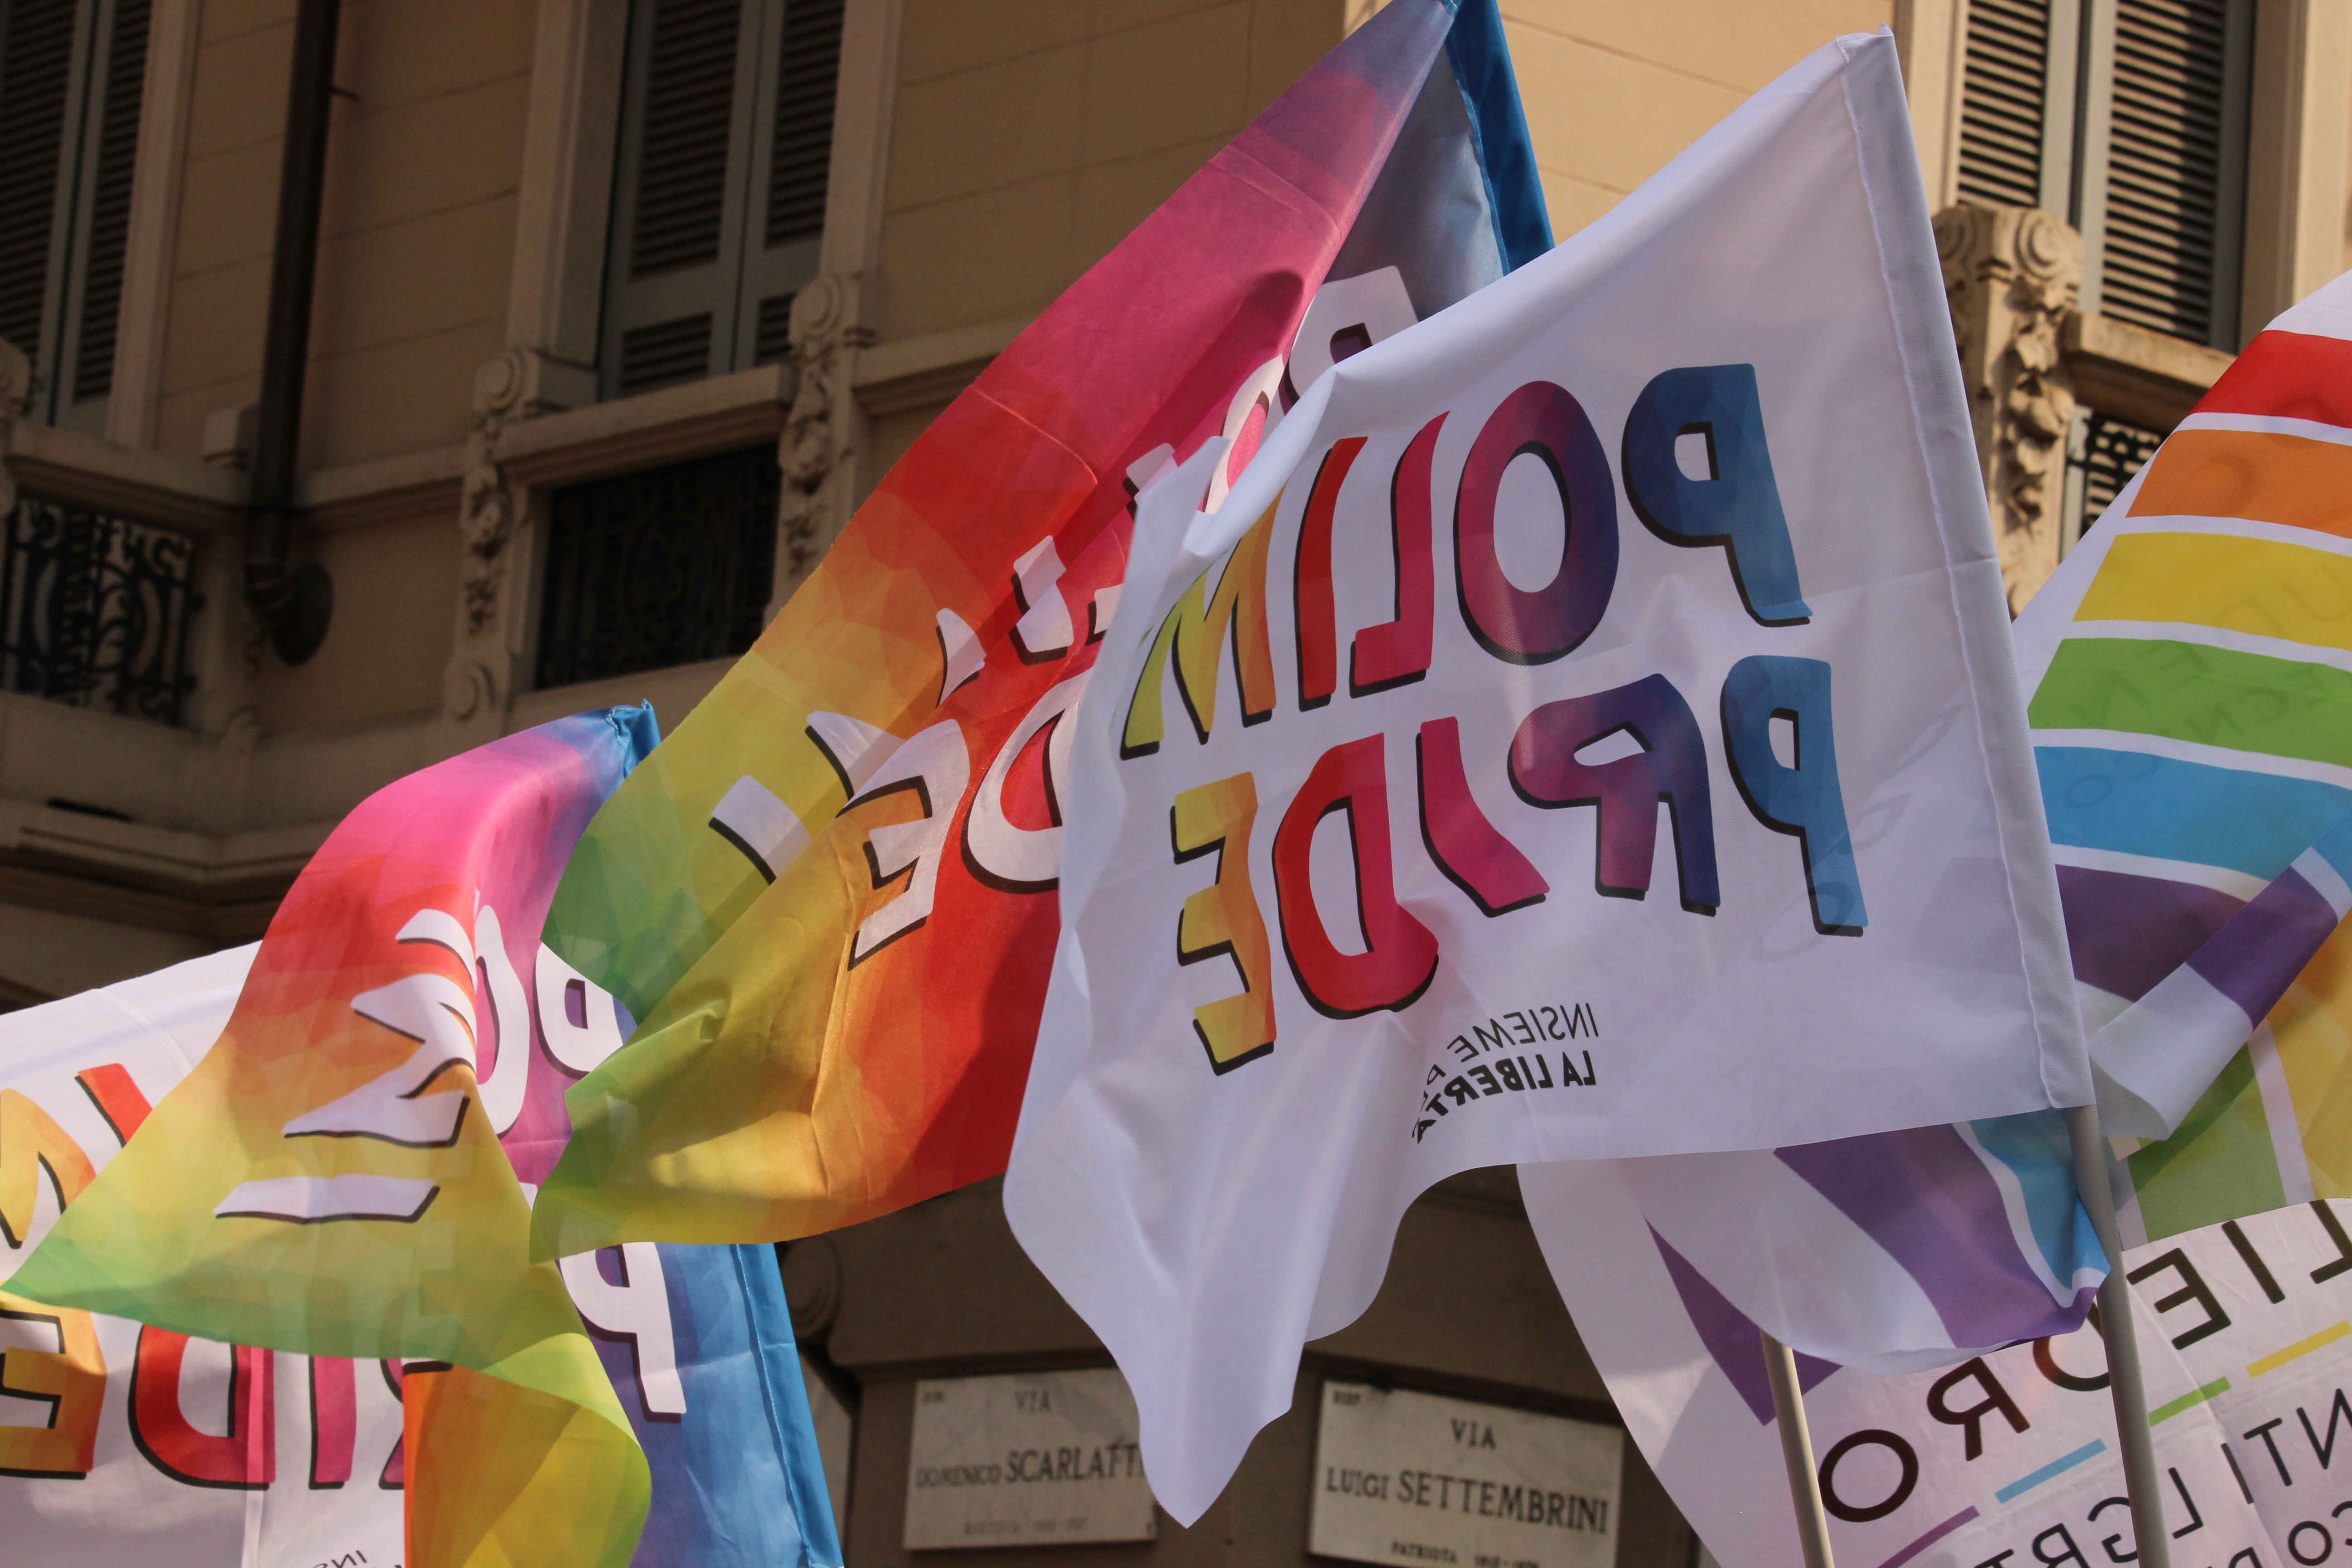 Polimi Pride promoted around campuses